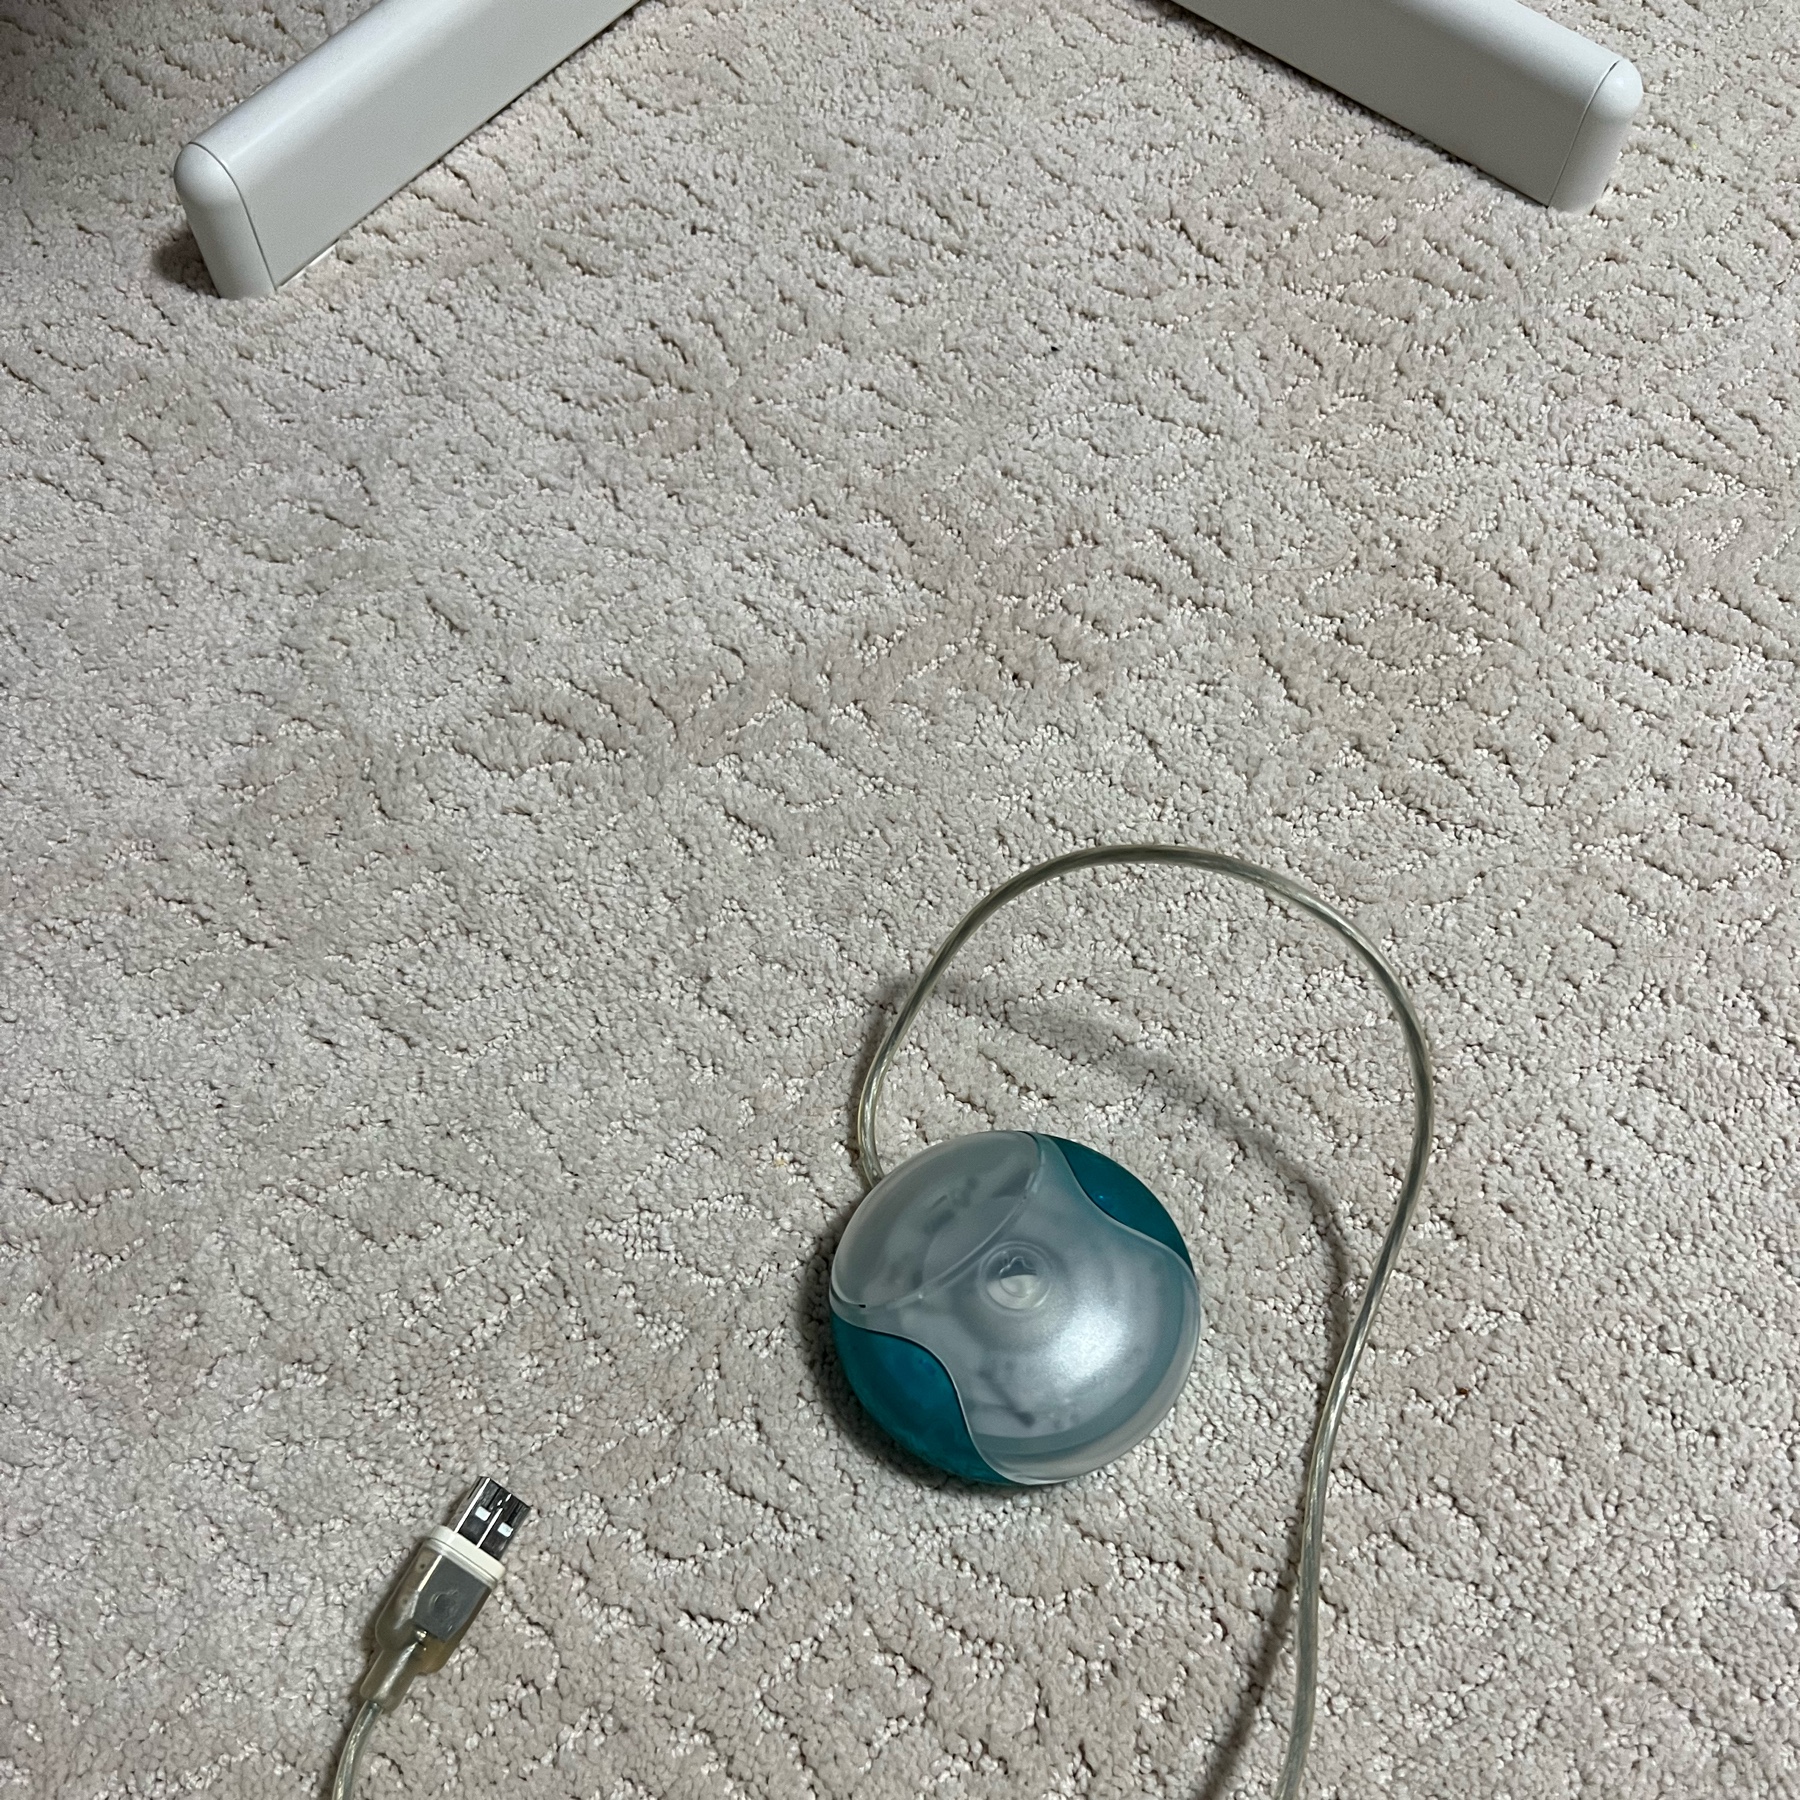 A blue and white USB puck mouse sitting on beige carpet